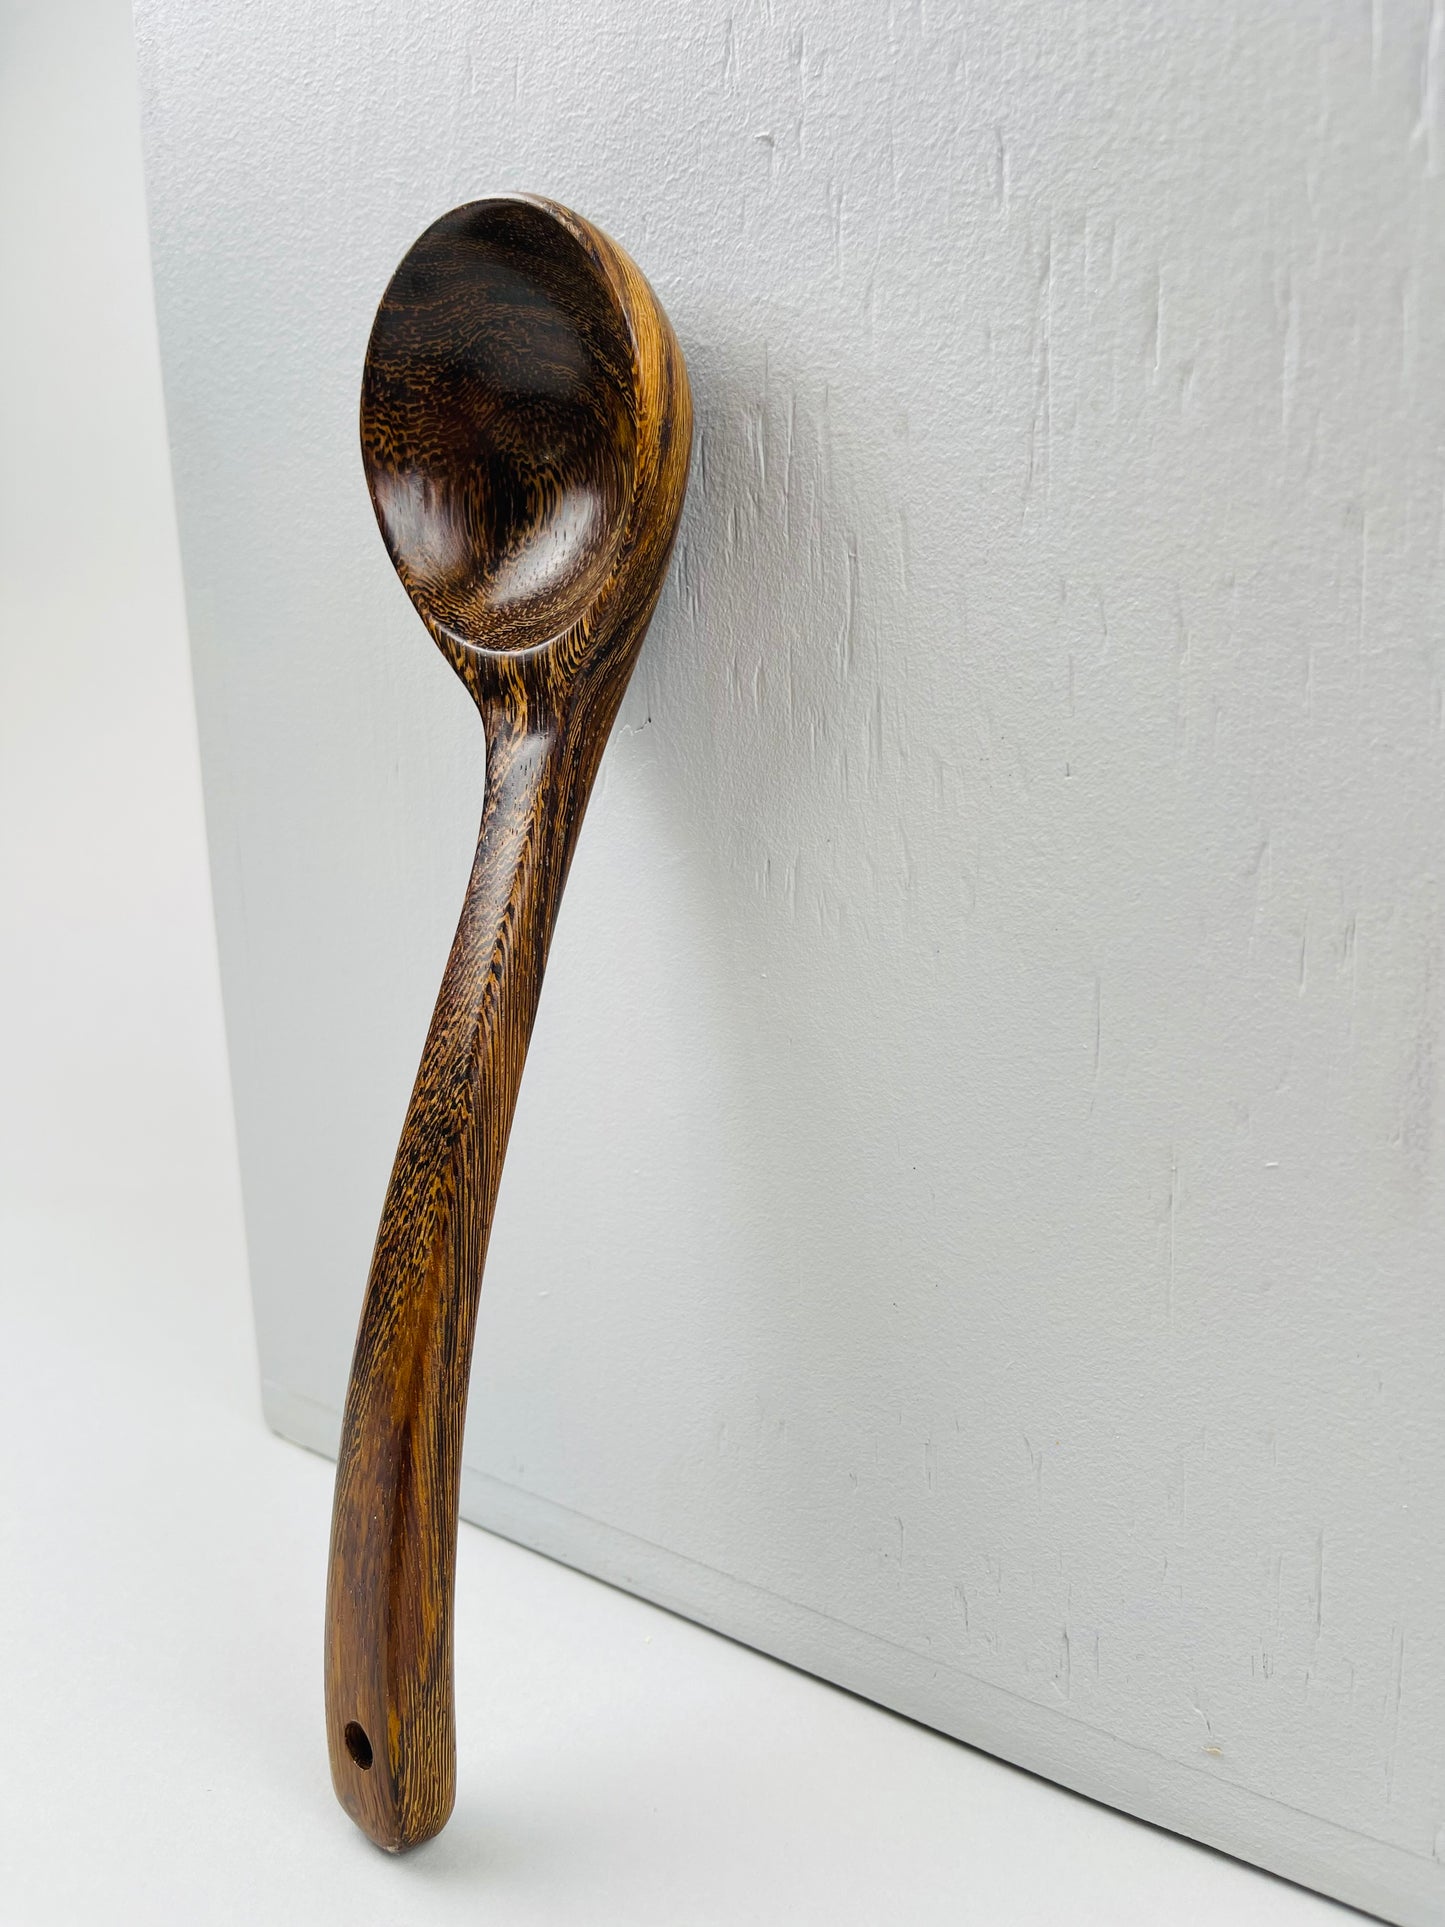 Wood Soup Ladle – Round and Oval with Slanted Handle